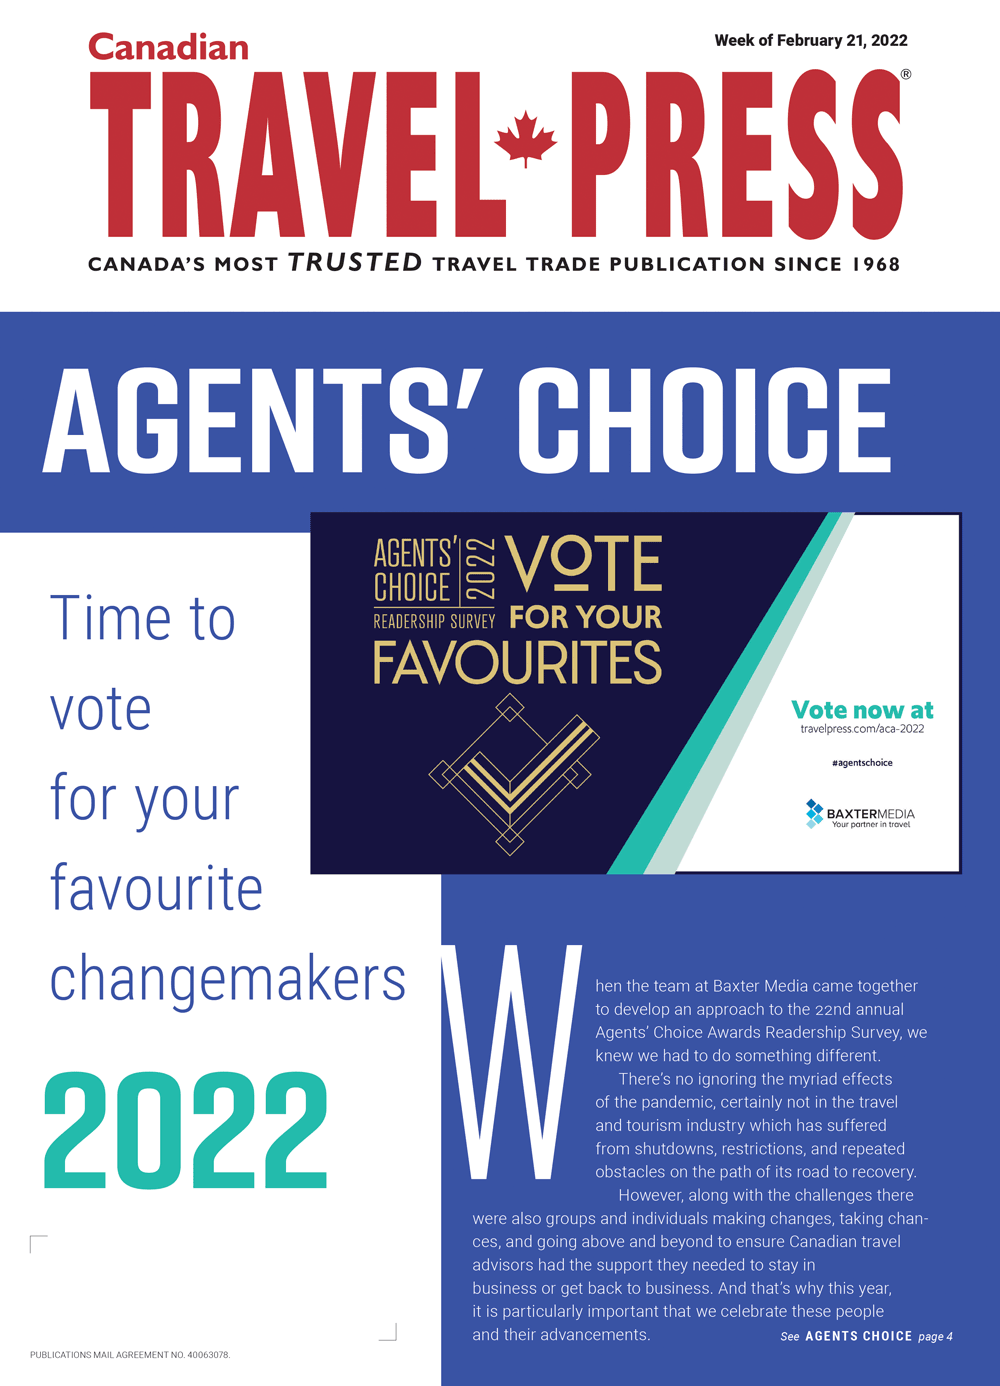 Time to vote in Agents’ Choice 2022